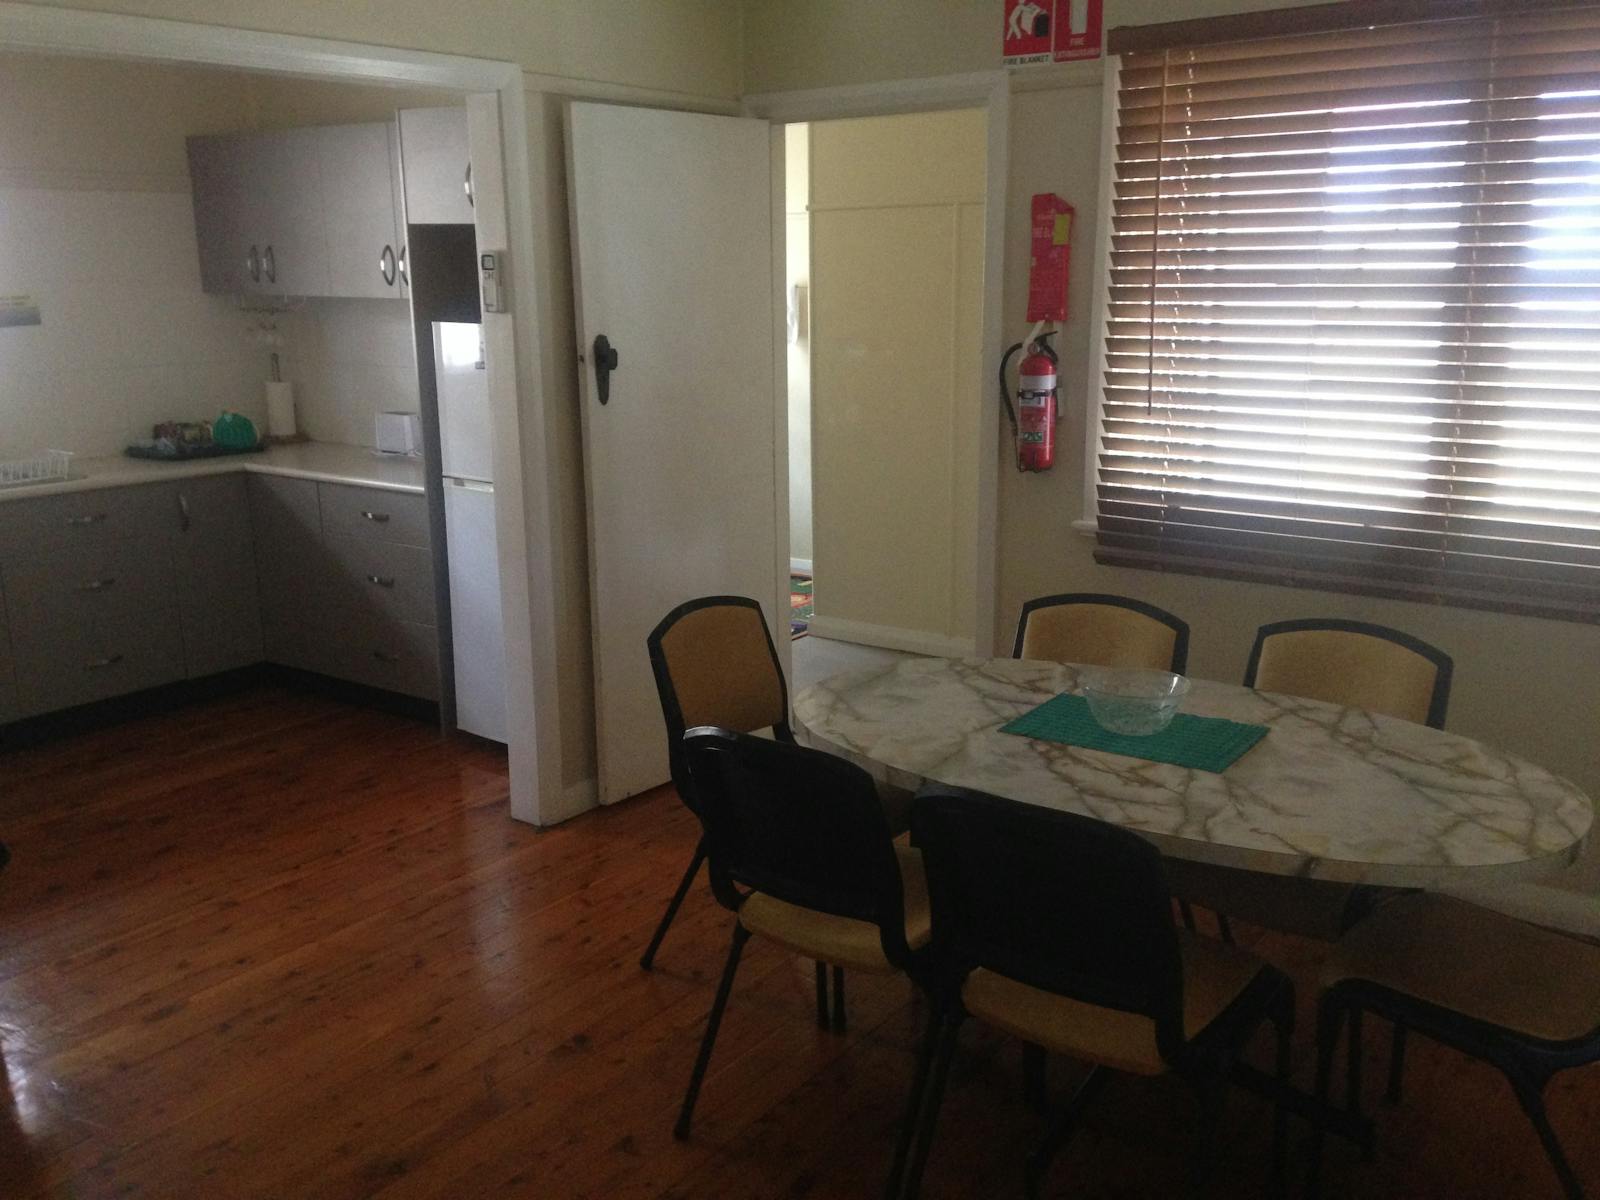 Kitchen on left with oval dinning table and six chairs on right.